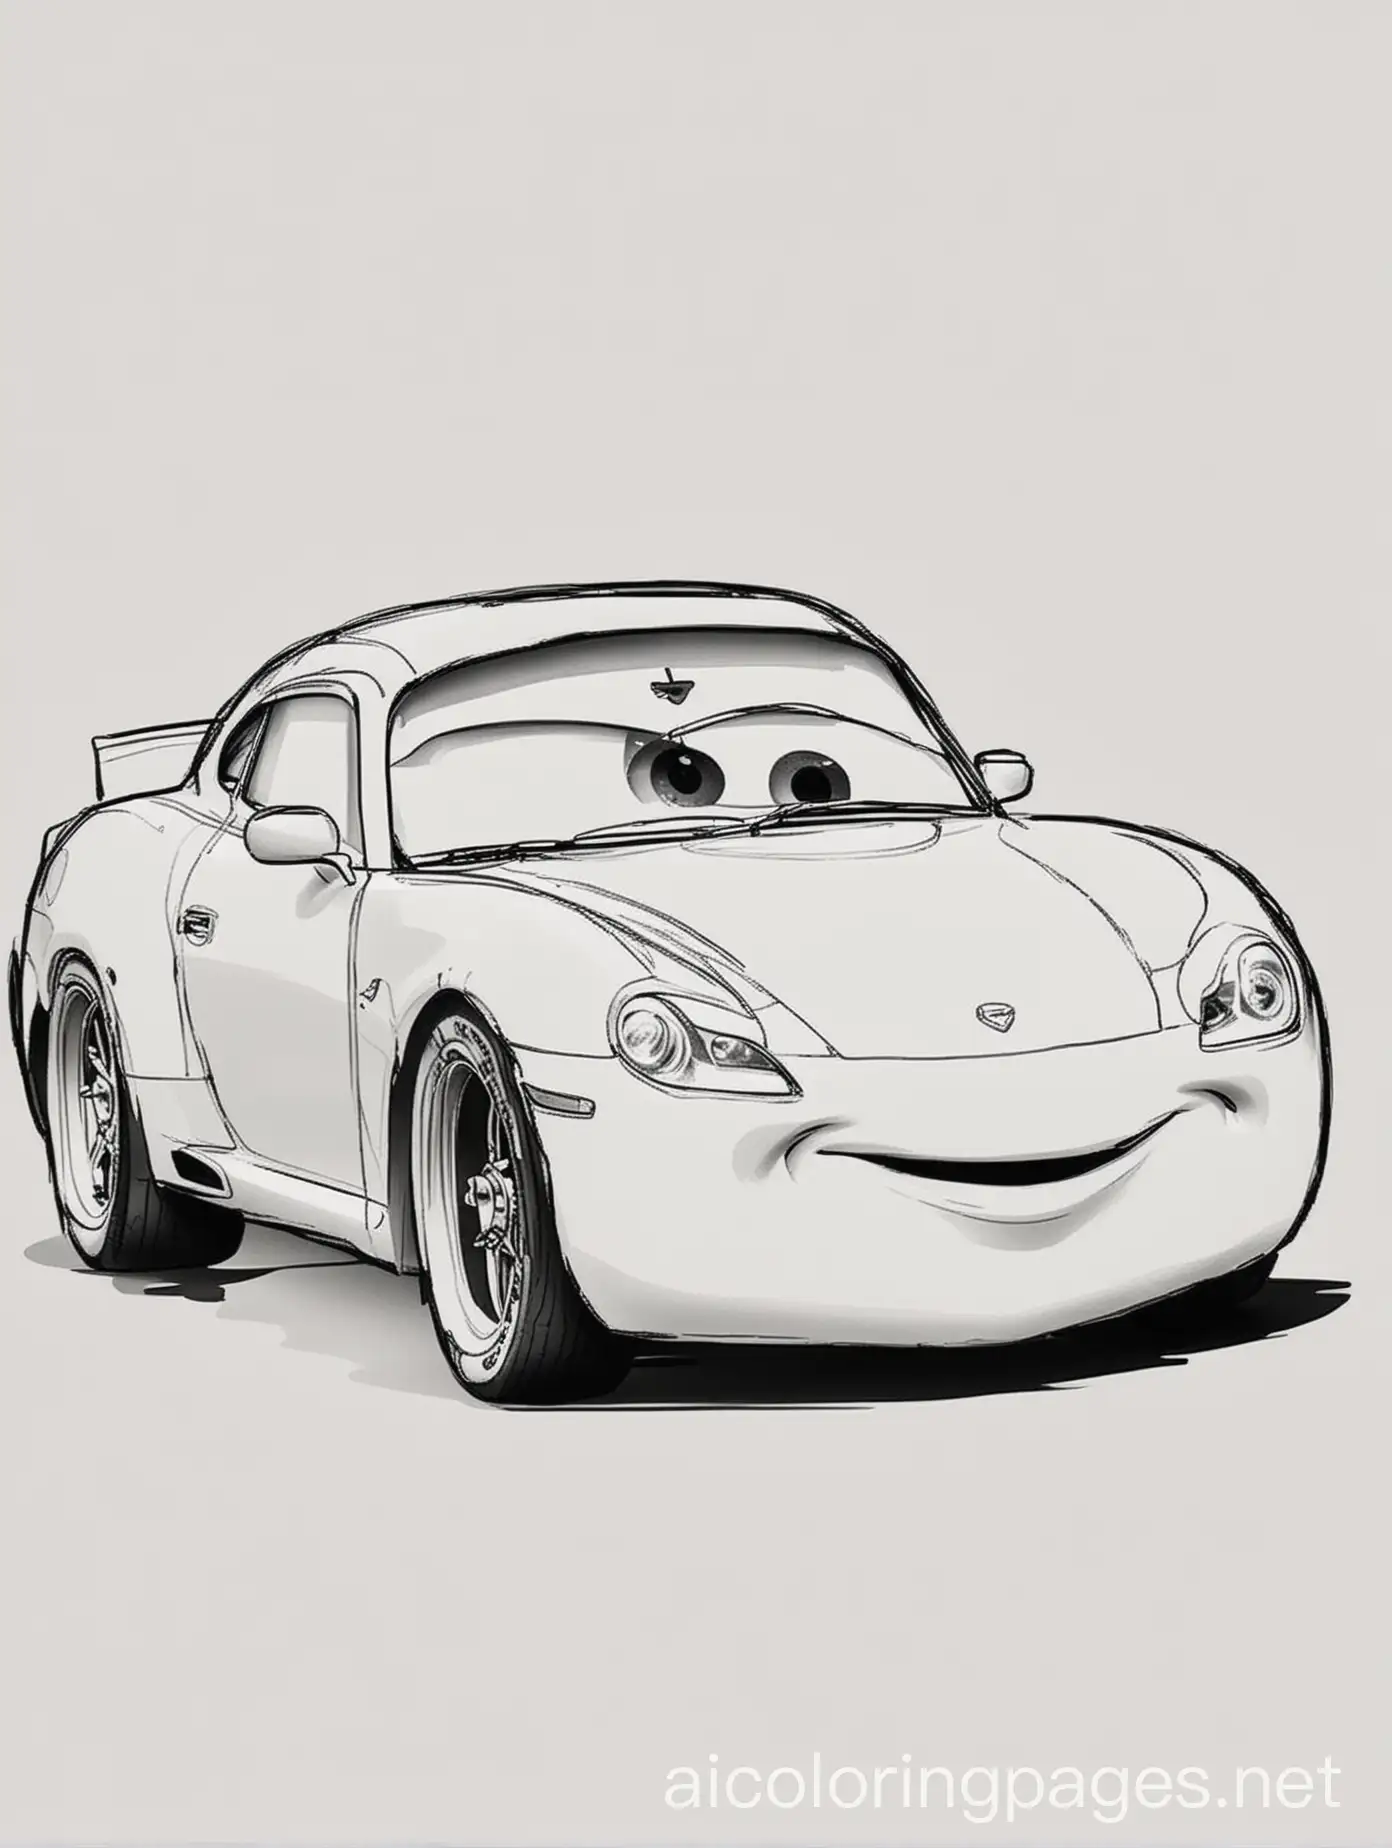 Uncolored simple car from Cars movie, Coloring Page, black and white, line art, white background, Simplicity, Ample White Space. The background of the coloring page is plain white to make it easy for young children to color within the lines. The outlines of all the subjects are easy to distinguish, making it simple for kids to color without too much difficulty